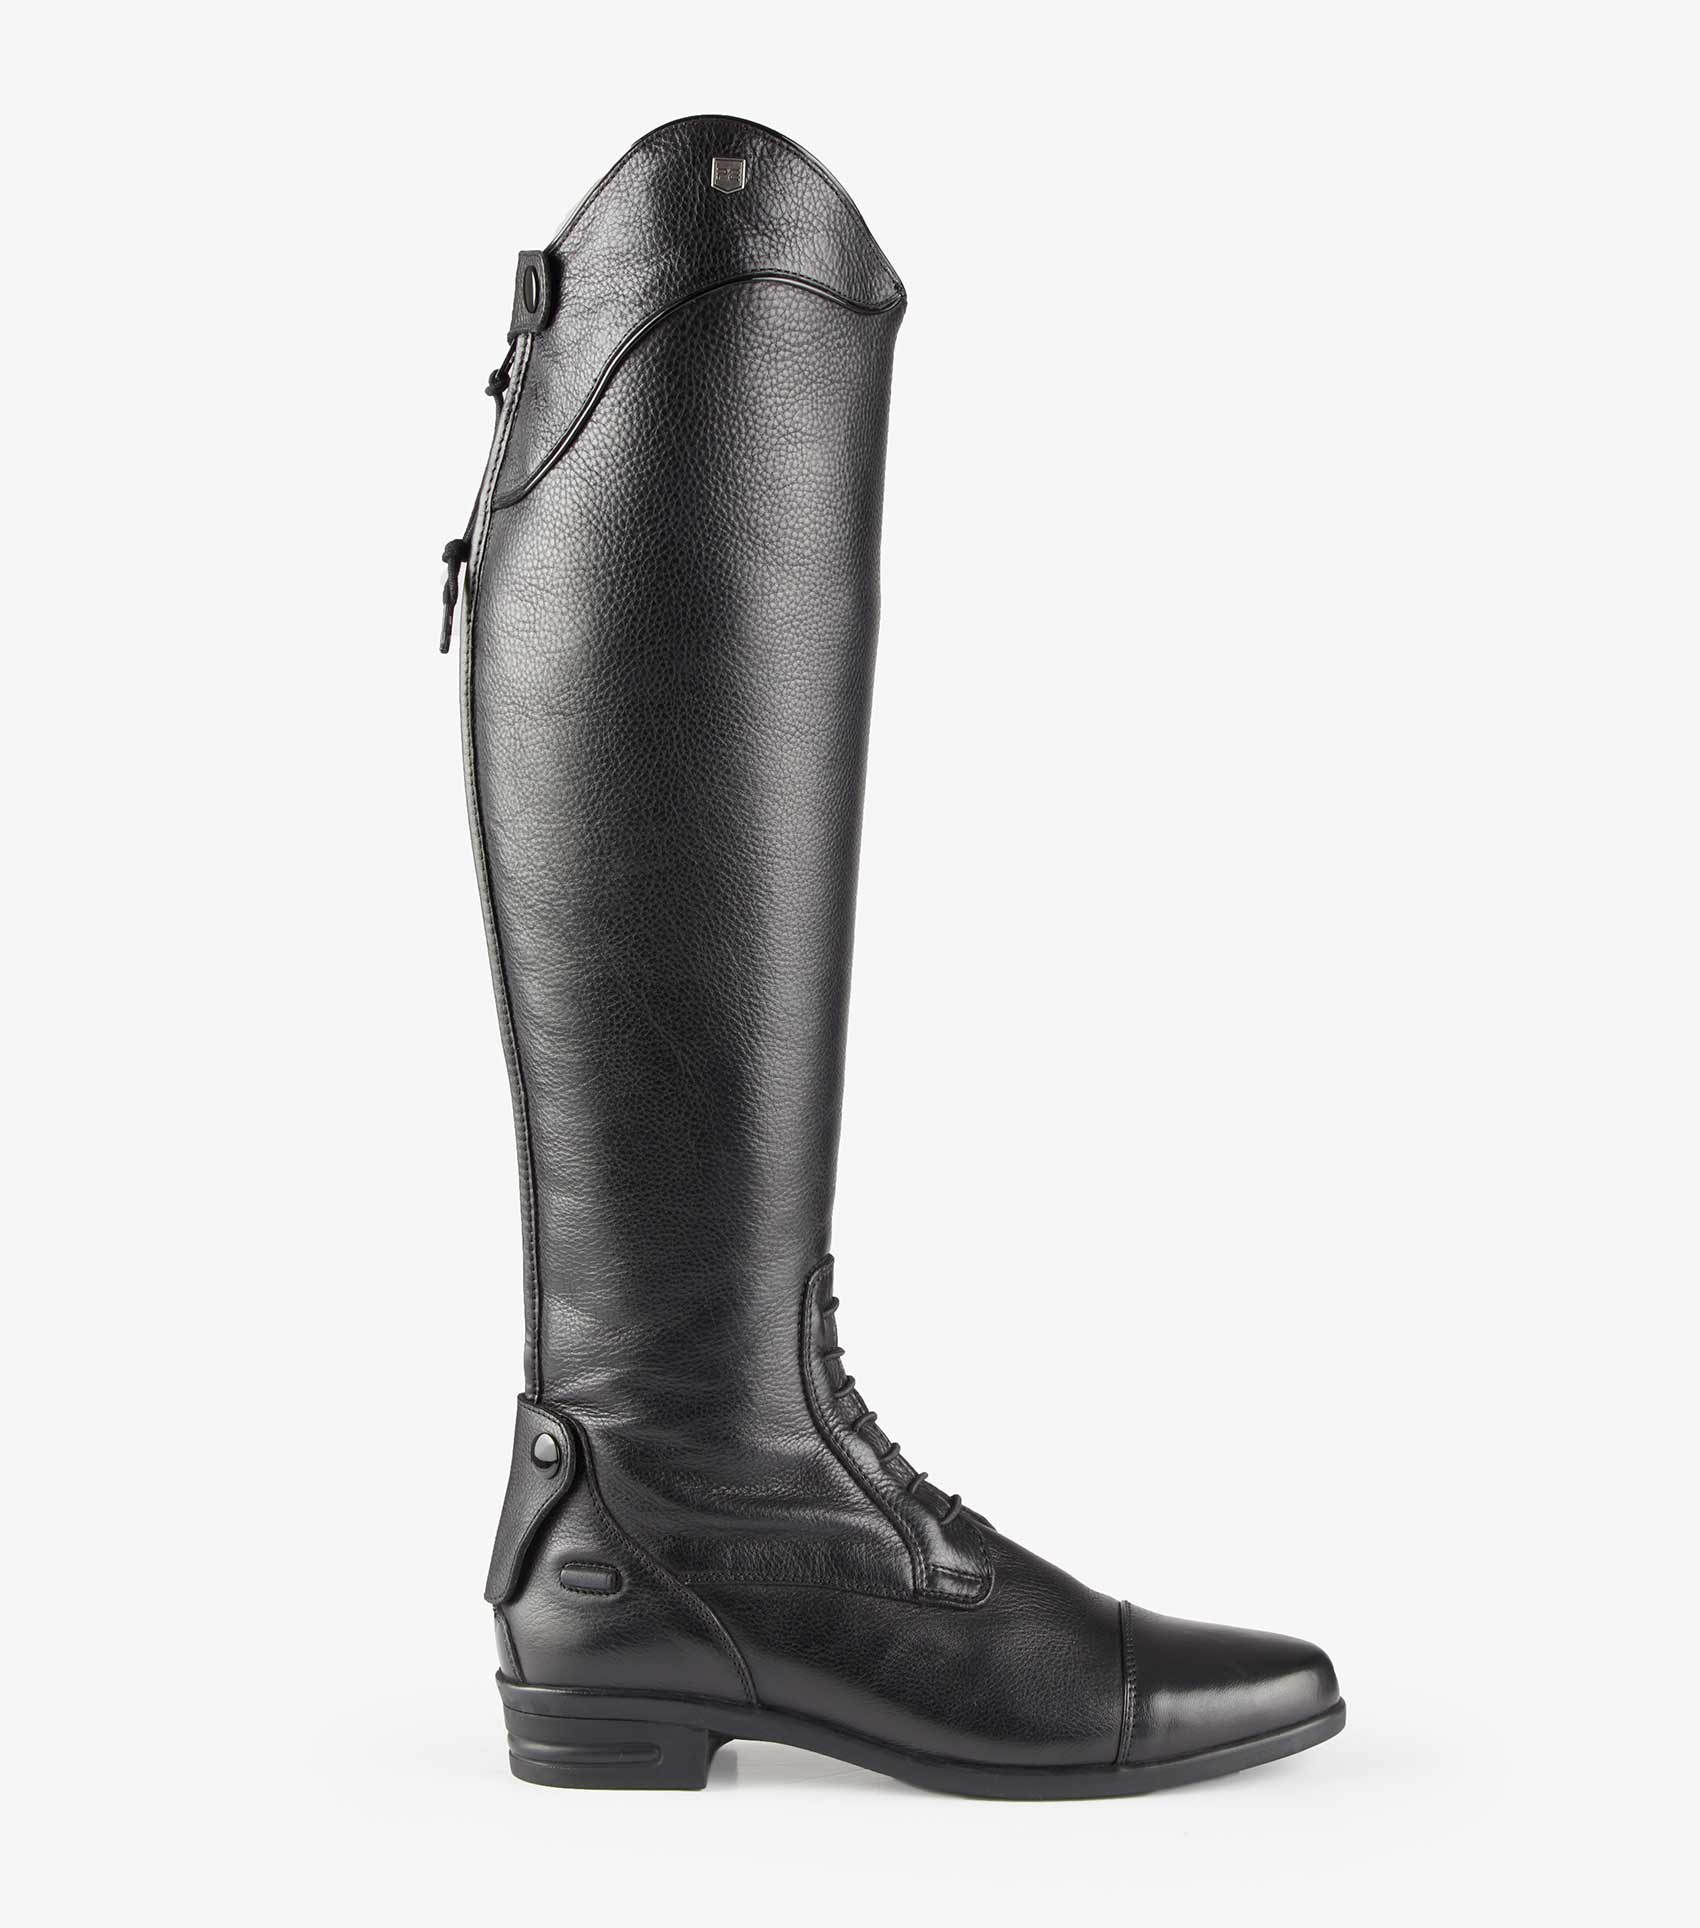 Tall Boot - Black Leather